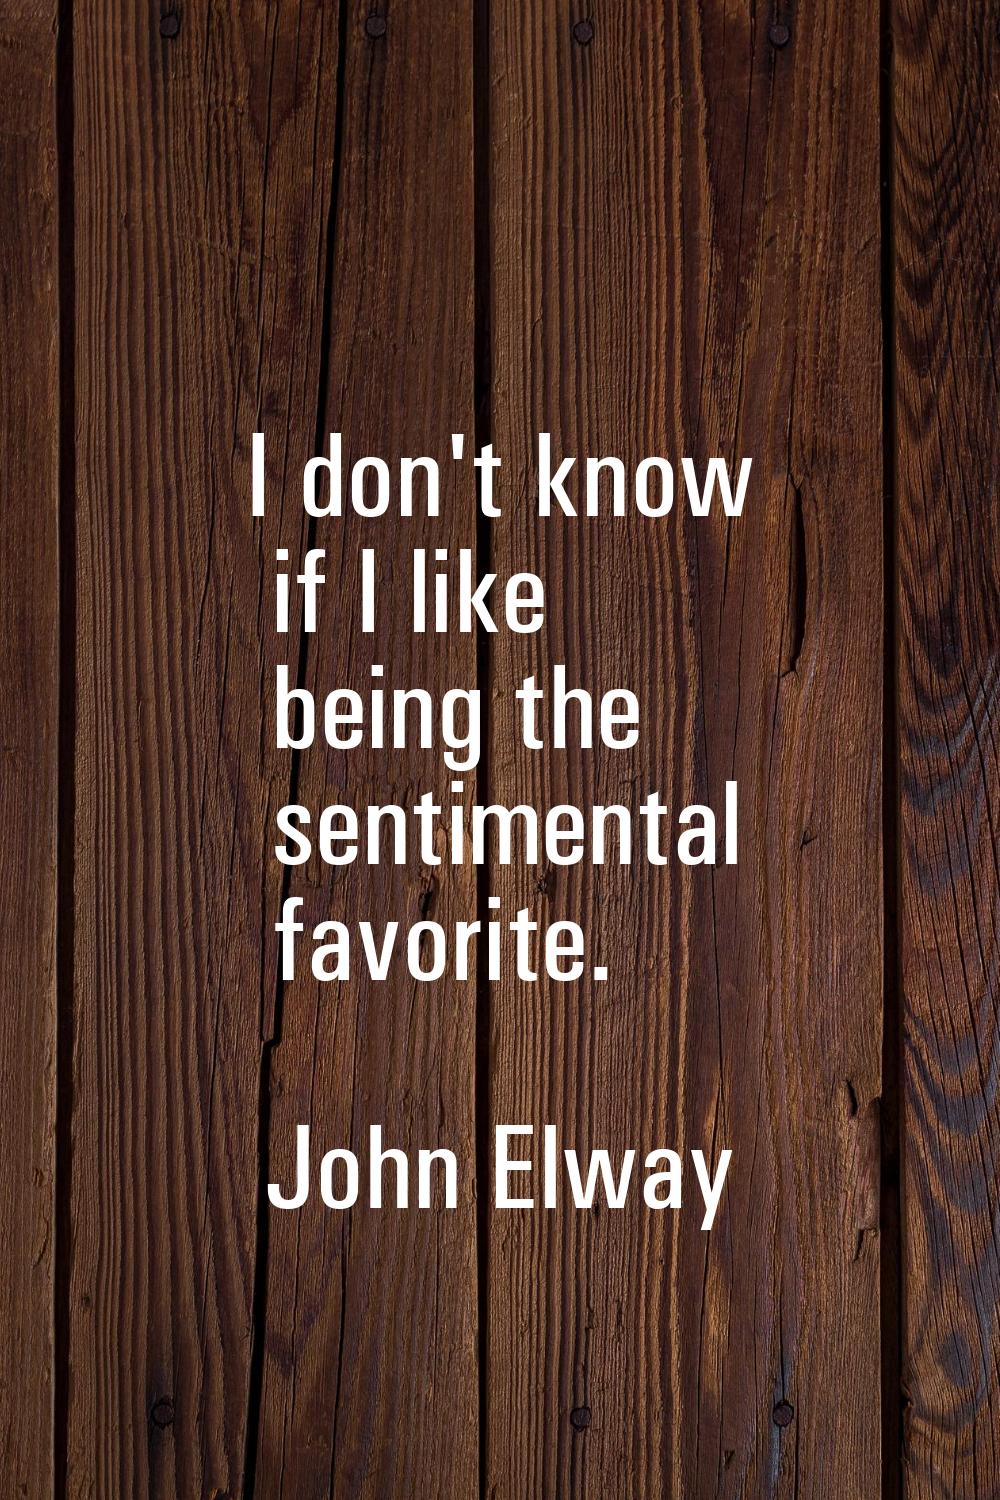 I don't know if I like being the sentimental favorite.